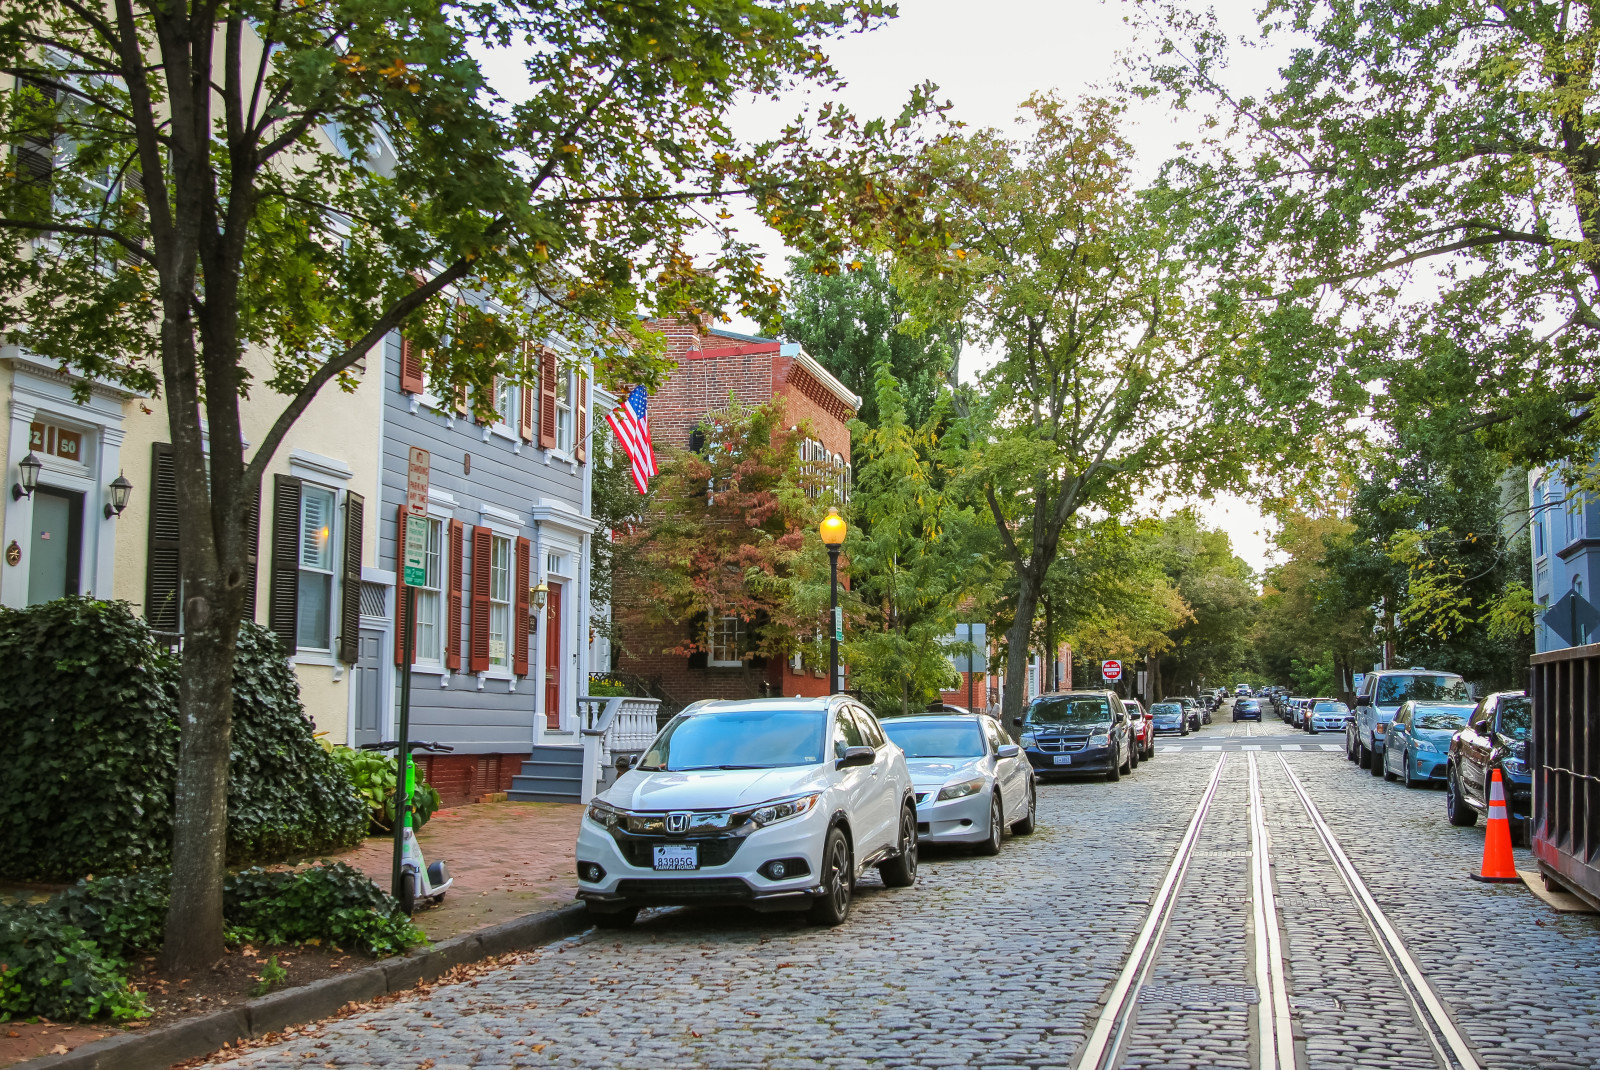 tree lined cobblestone street with parked cars